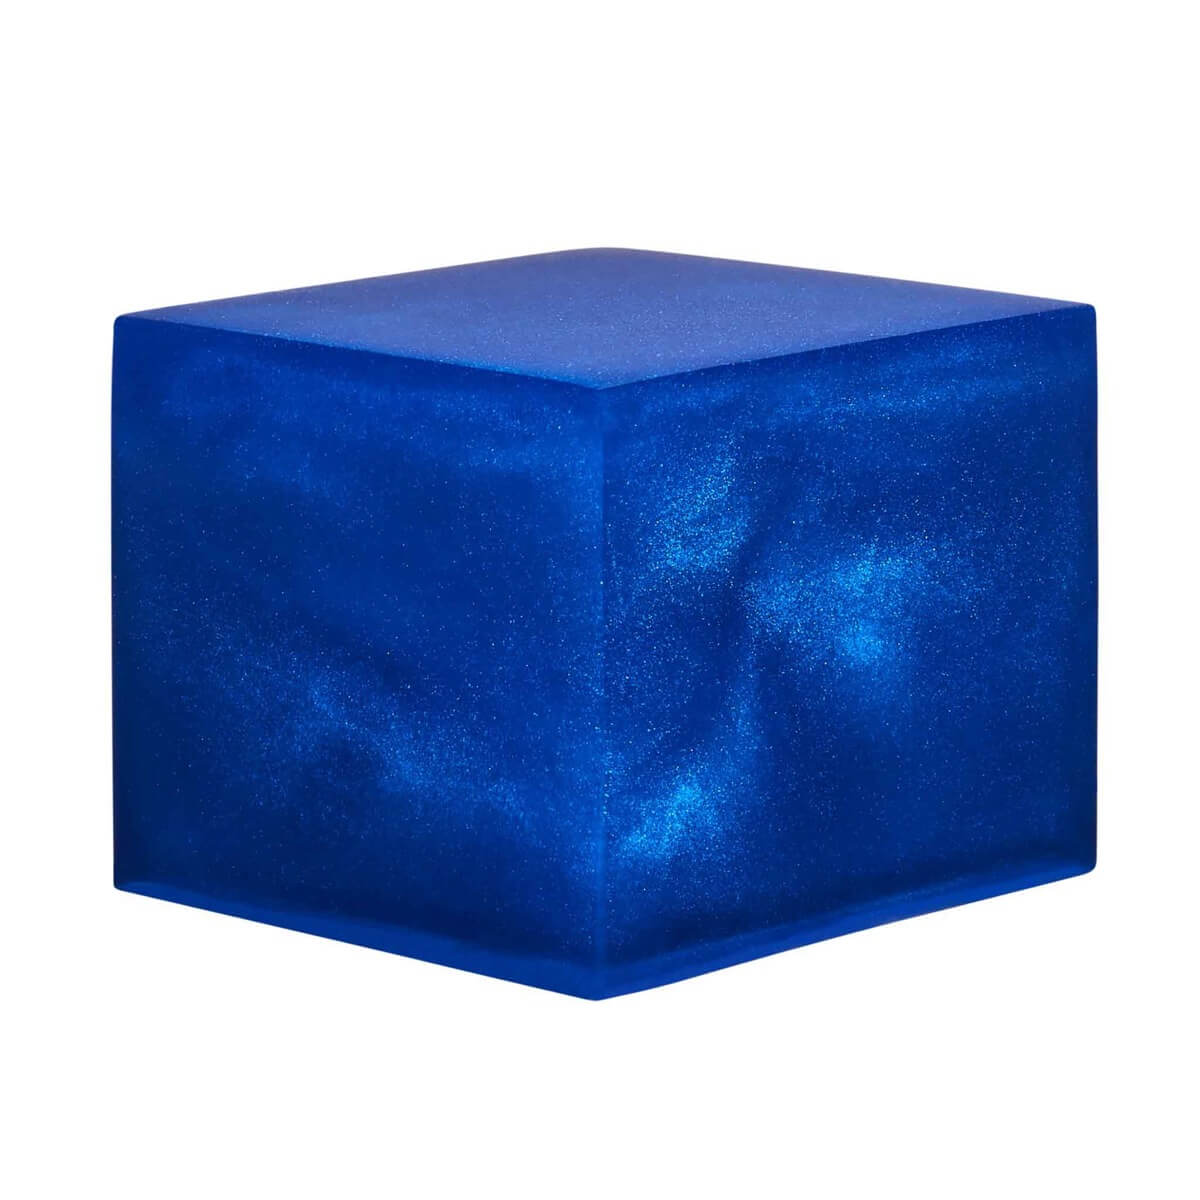 A resin cube made with the Electric Sapphire Mica Powder Pigment by Pigmently.